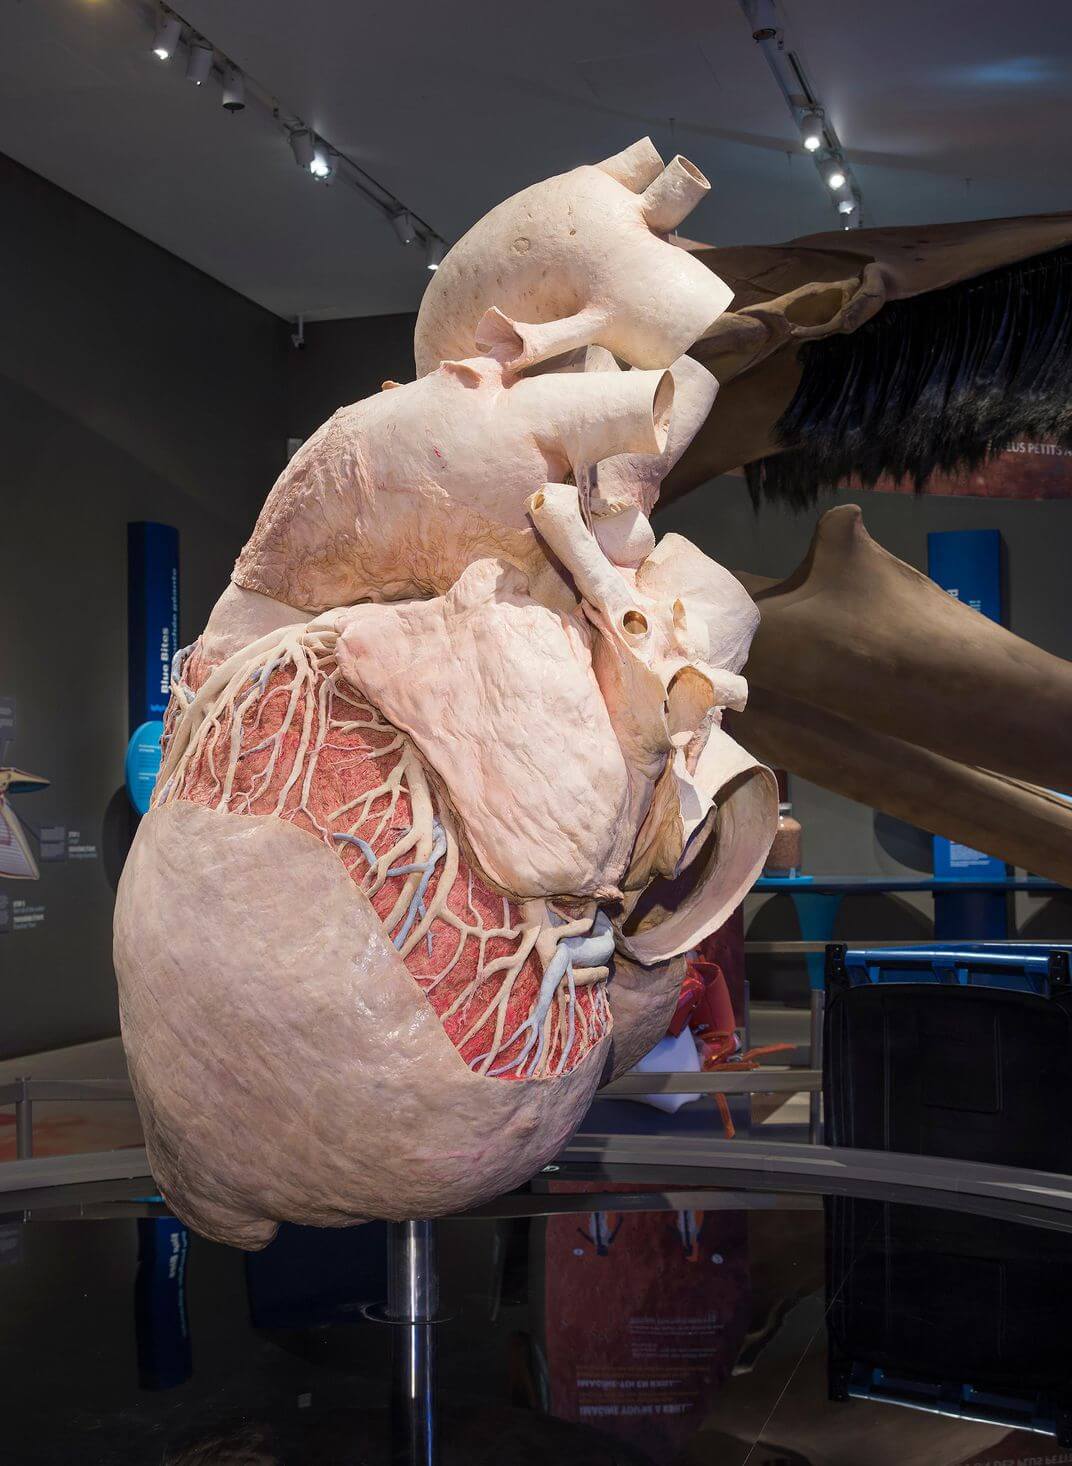 Blue whale heart conserved, big as a car